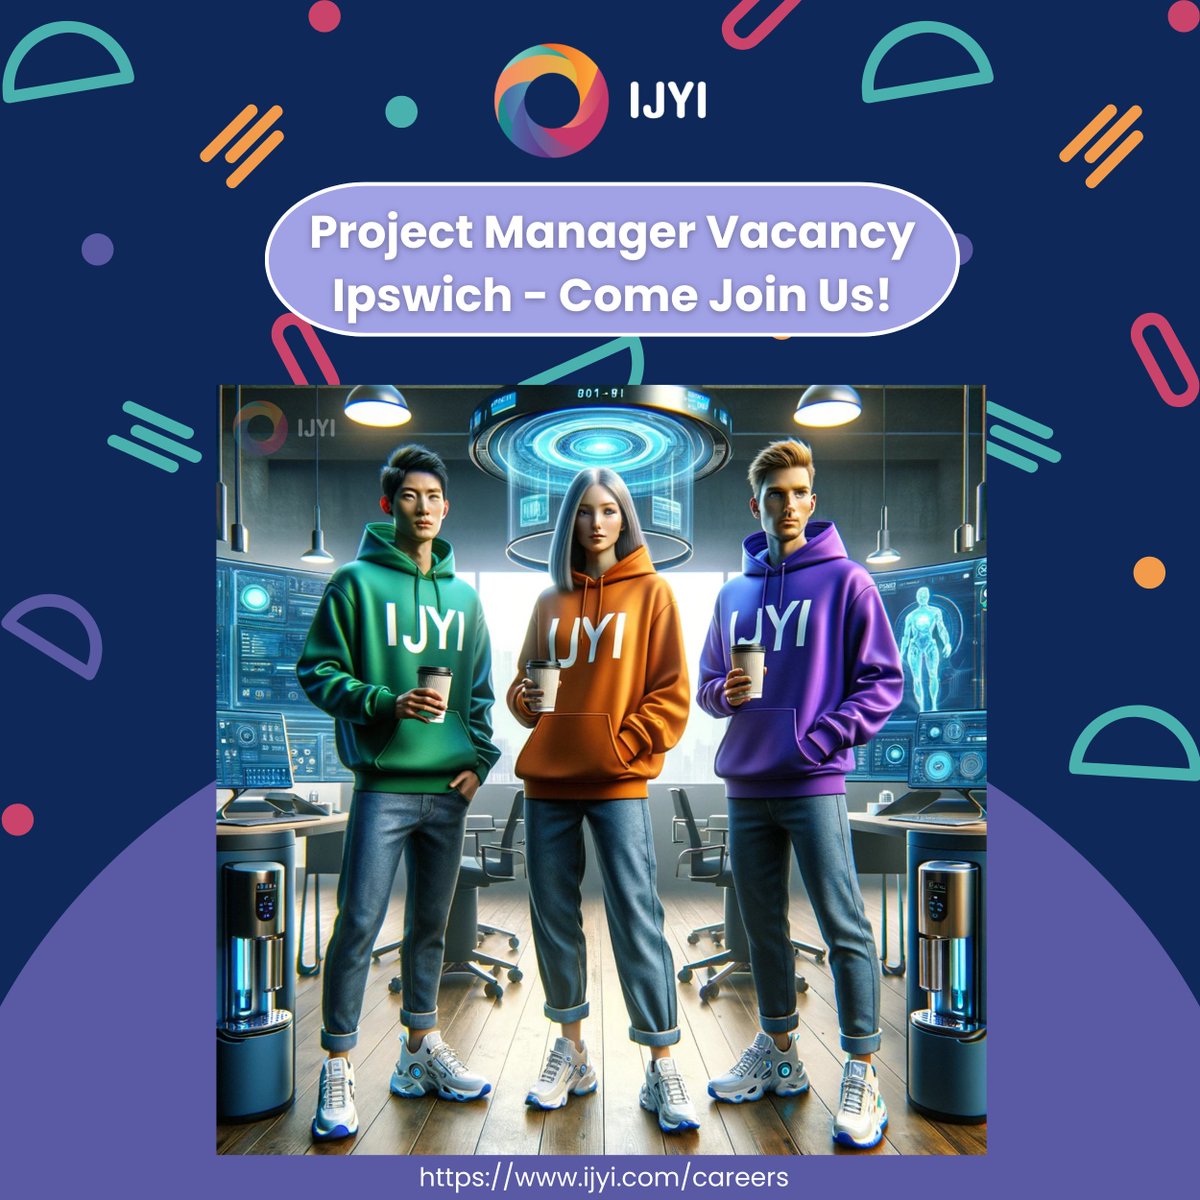 🌟 Exciting Vacancy at IJYI - Project Manager! 🌟

We're on the lookout for a talented Project Manager to join our innovative team at IJYI.

For full details, see our current vacancies and apply at:
ijyi.com/careers

#ipswichjobs #projectmanagement  #careeropportunities